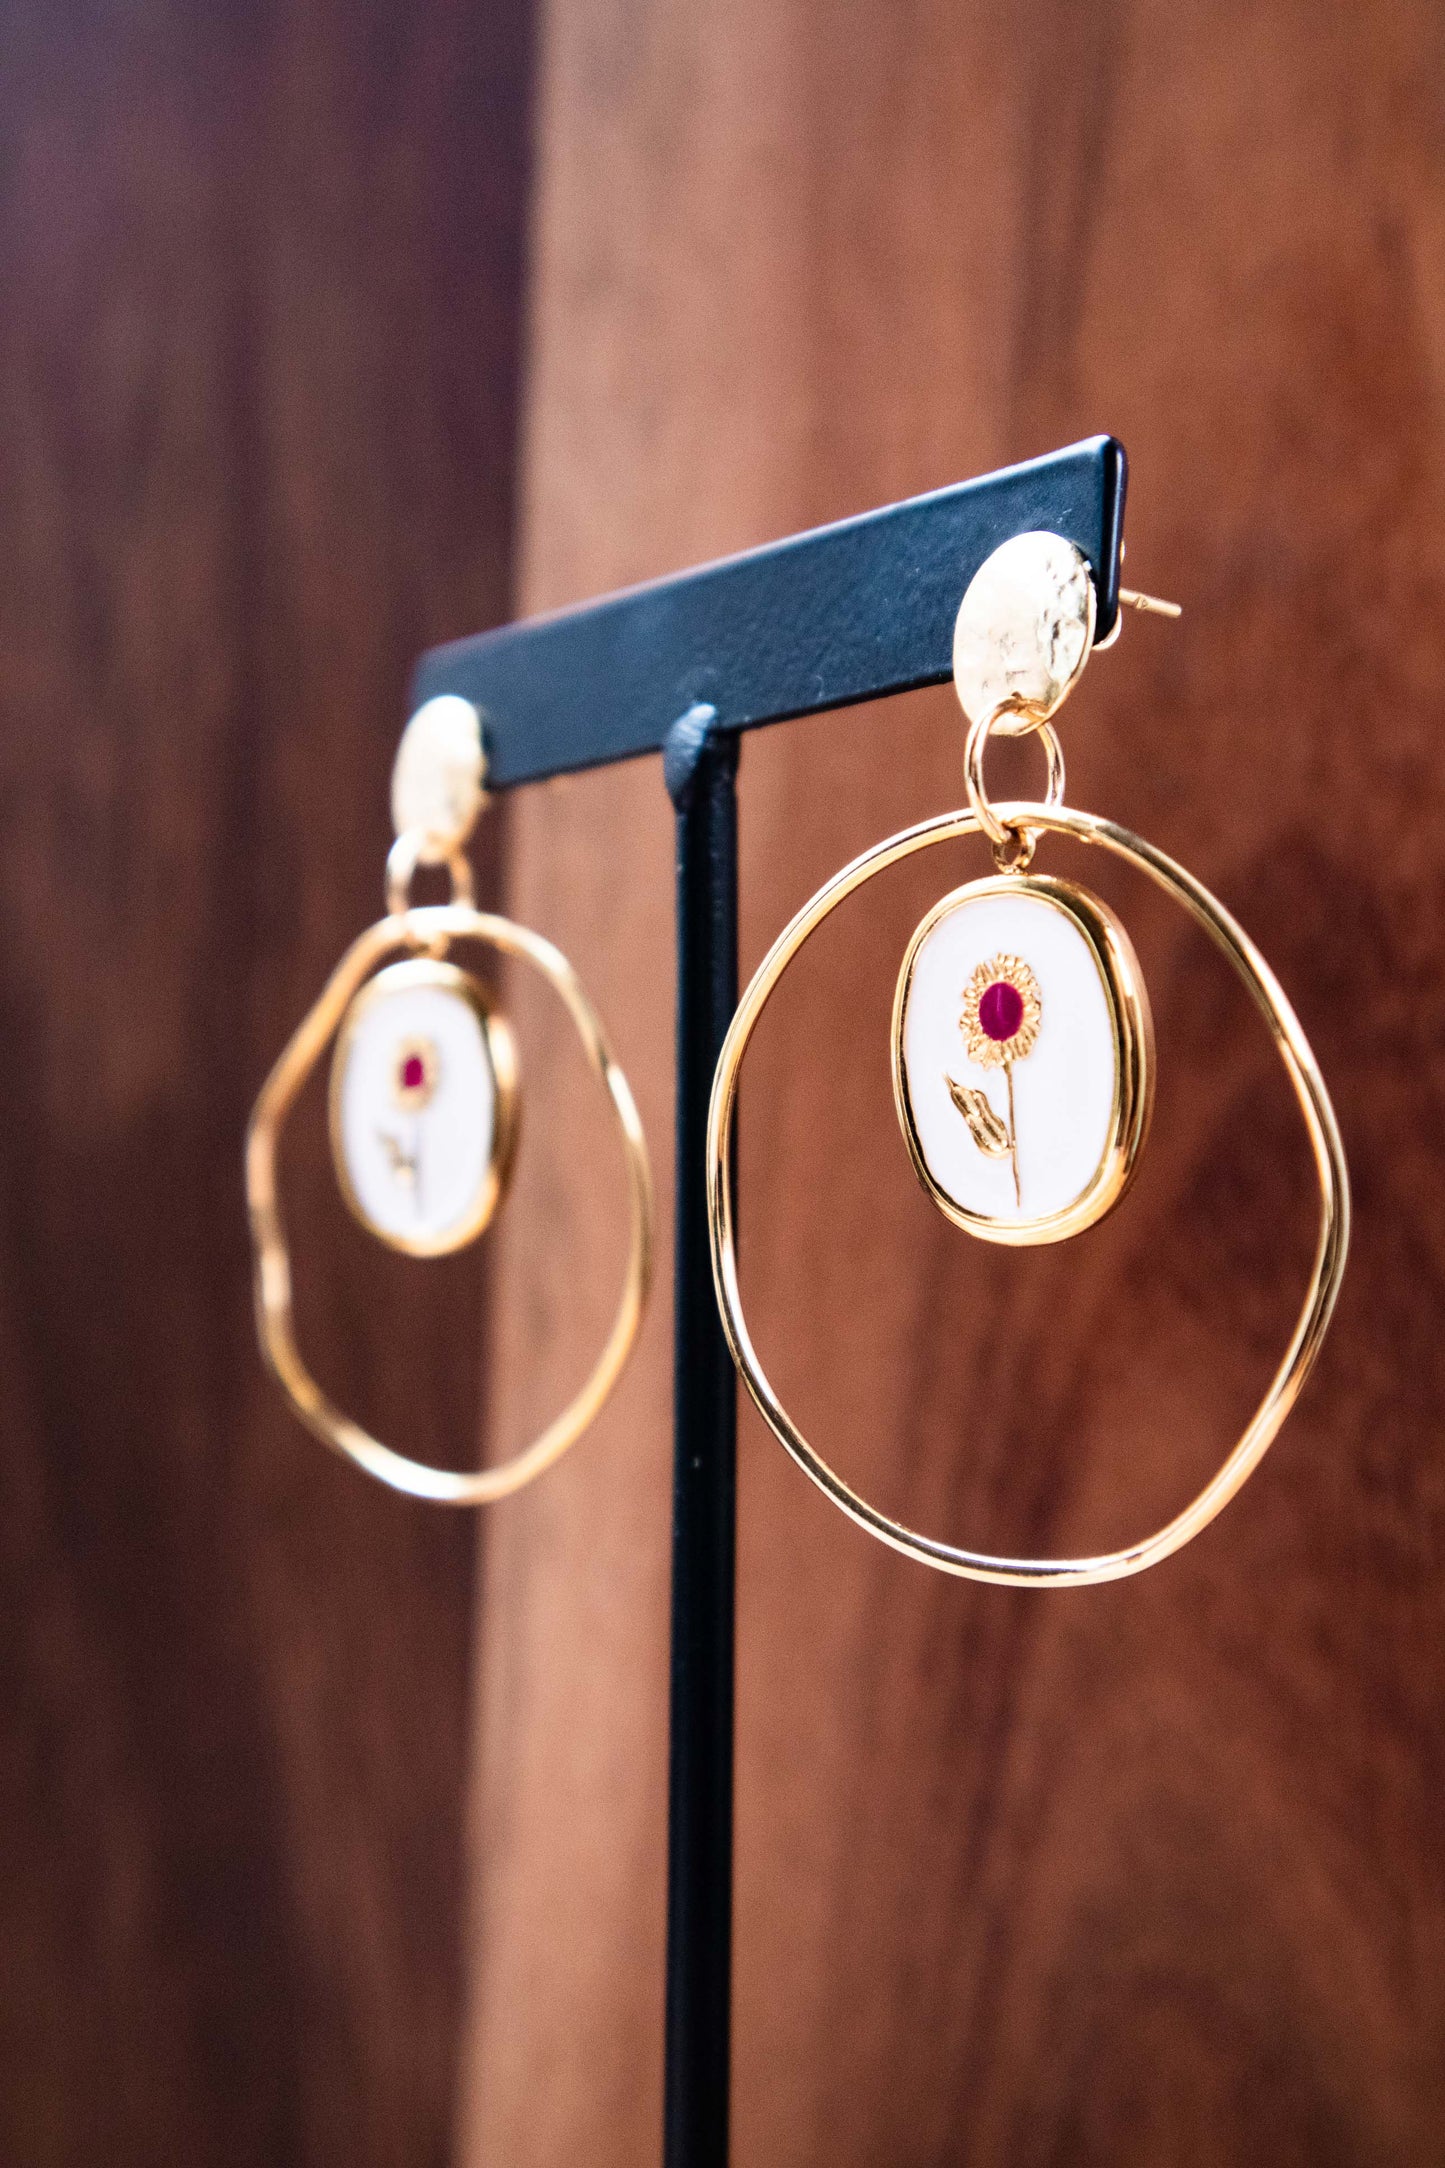 Earrings by FeSendra | Acetate | Fine Gold - 24 Carat Gold - PENDENTE OVAL ACIER INOX 316L DORÉ - Or 18 Carats